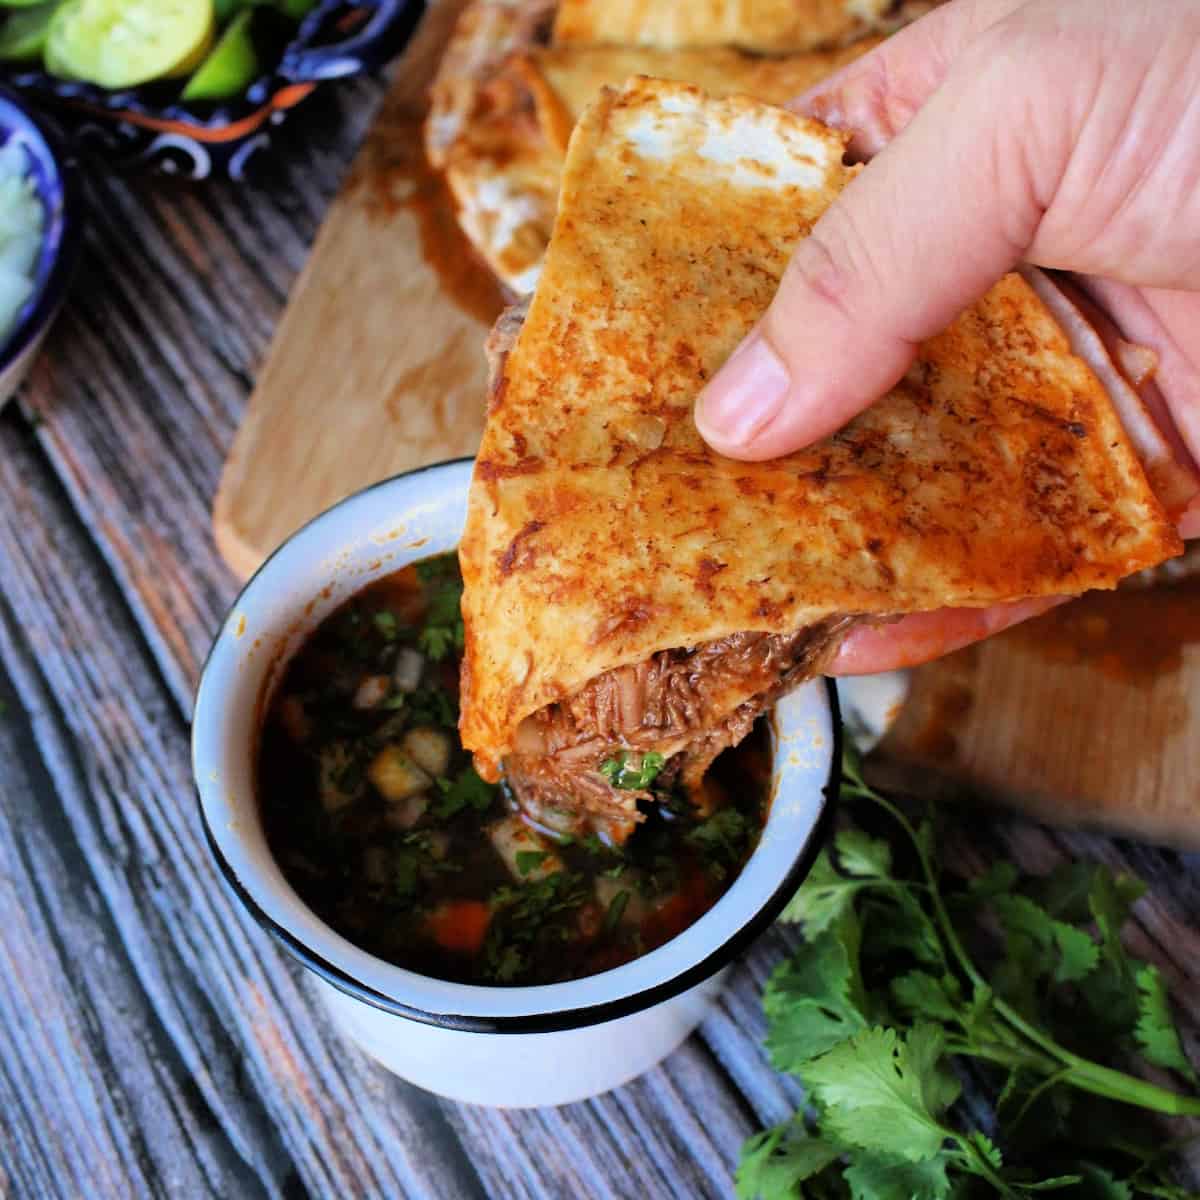 A hand holding a slice of birria pizza and dunking it into a cup with consomme.